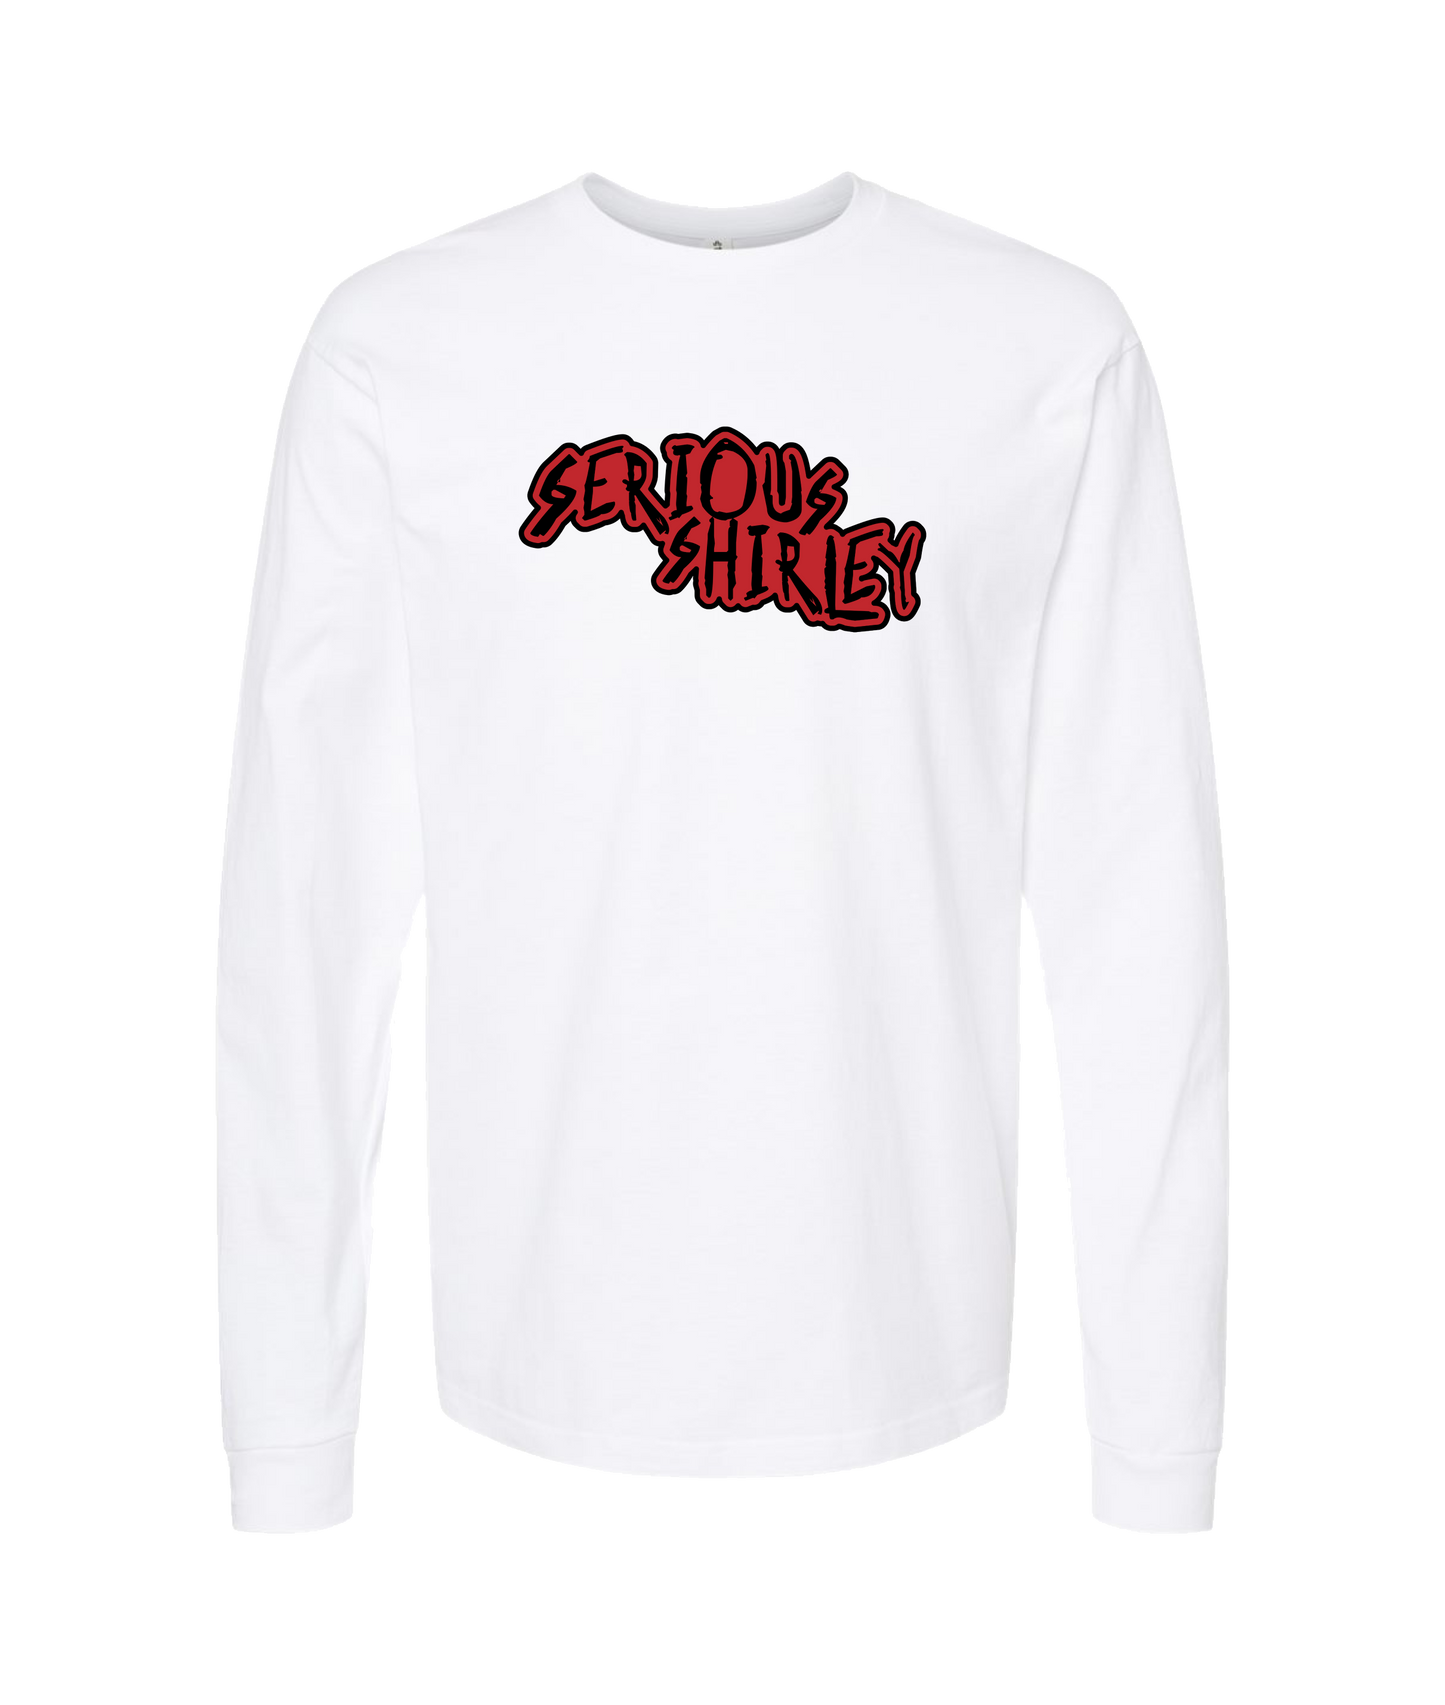 Serious Shirley - Red Scratch - White Long Sleeve T